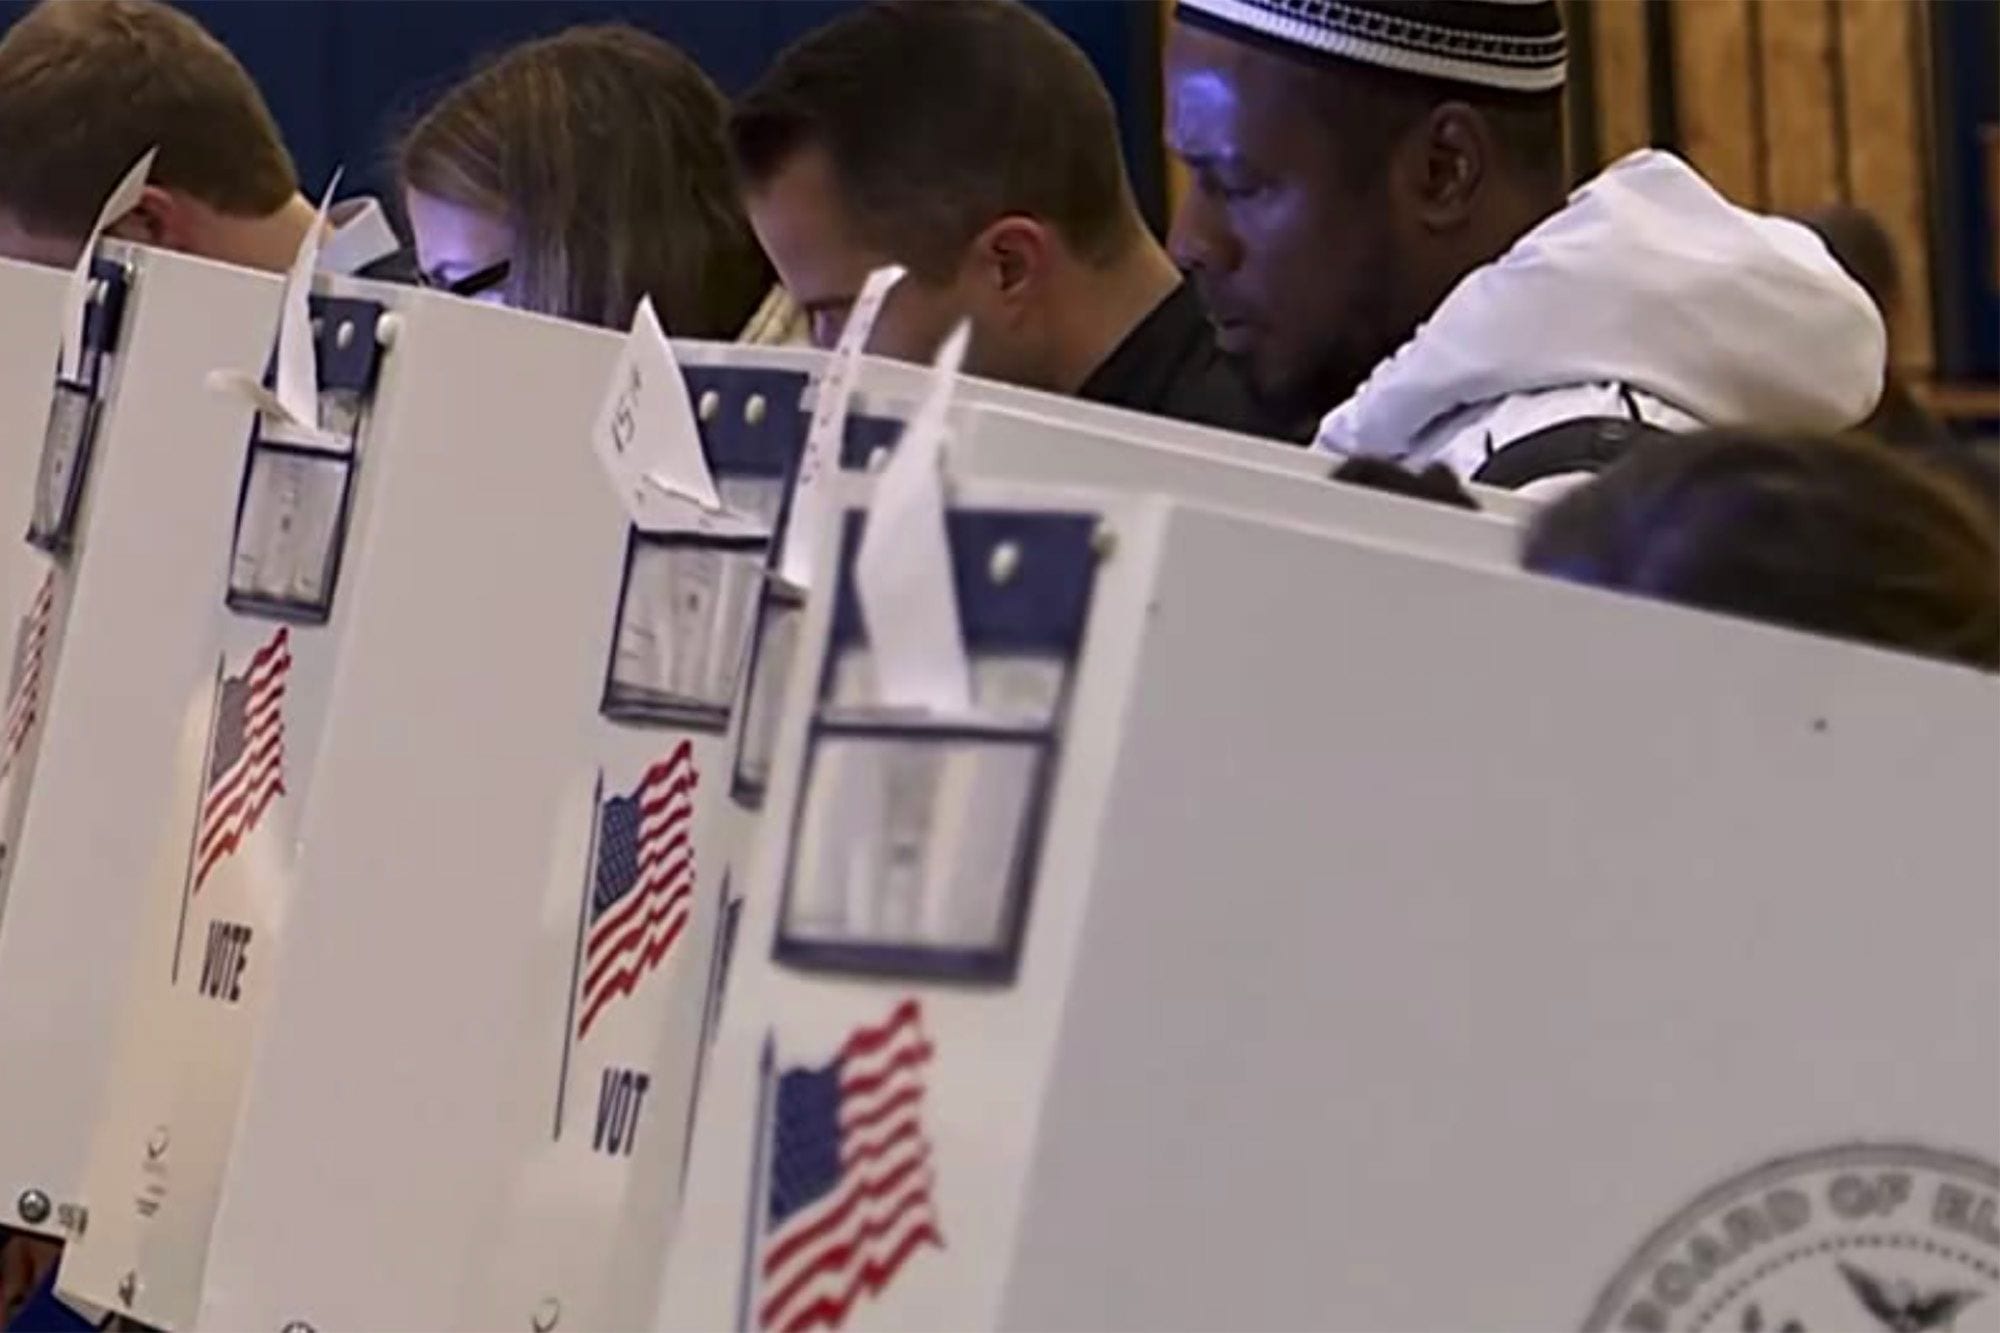 ‘All In: The Fight for Democracy’ Spotlights America’s Current Voting Restrictions as Jim Crow 2.0